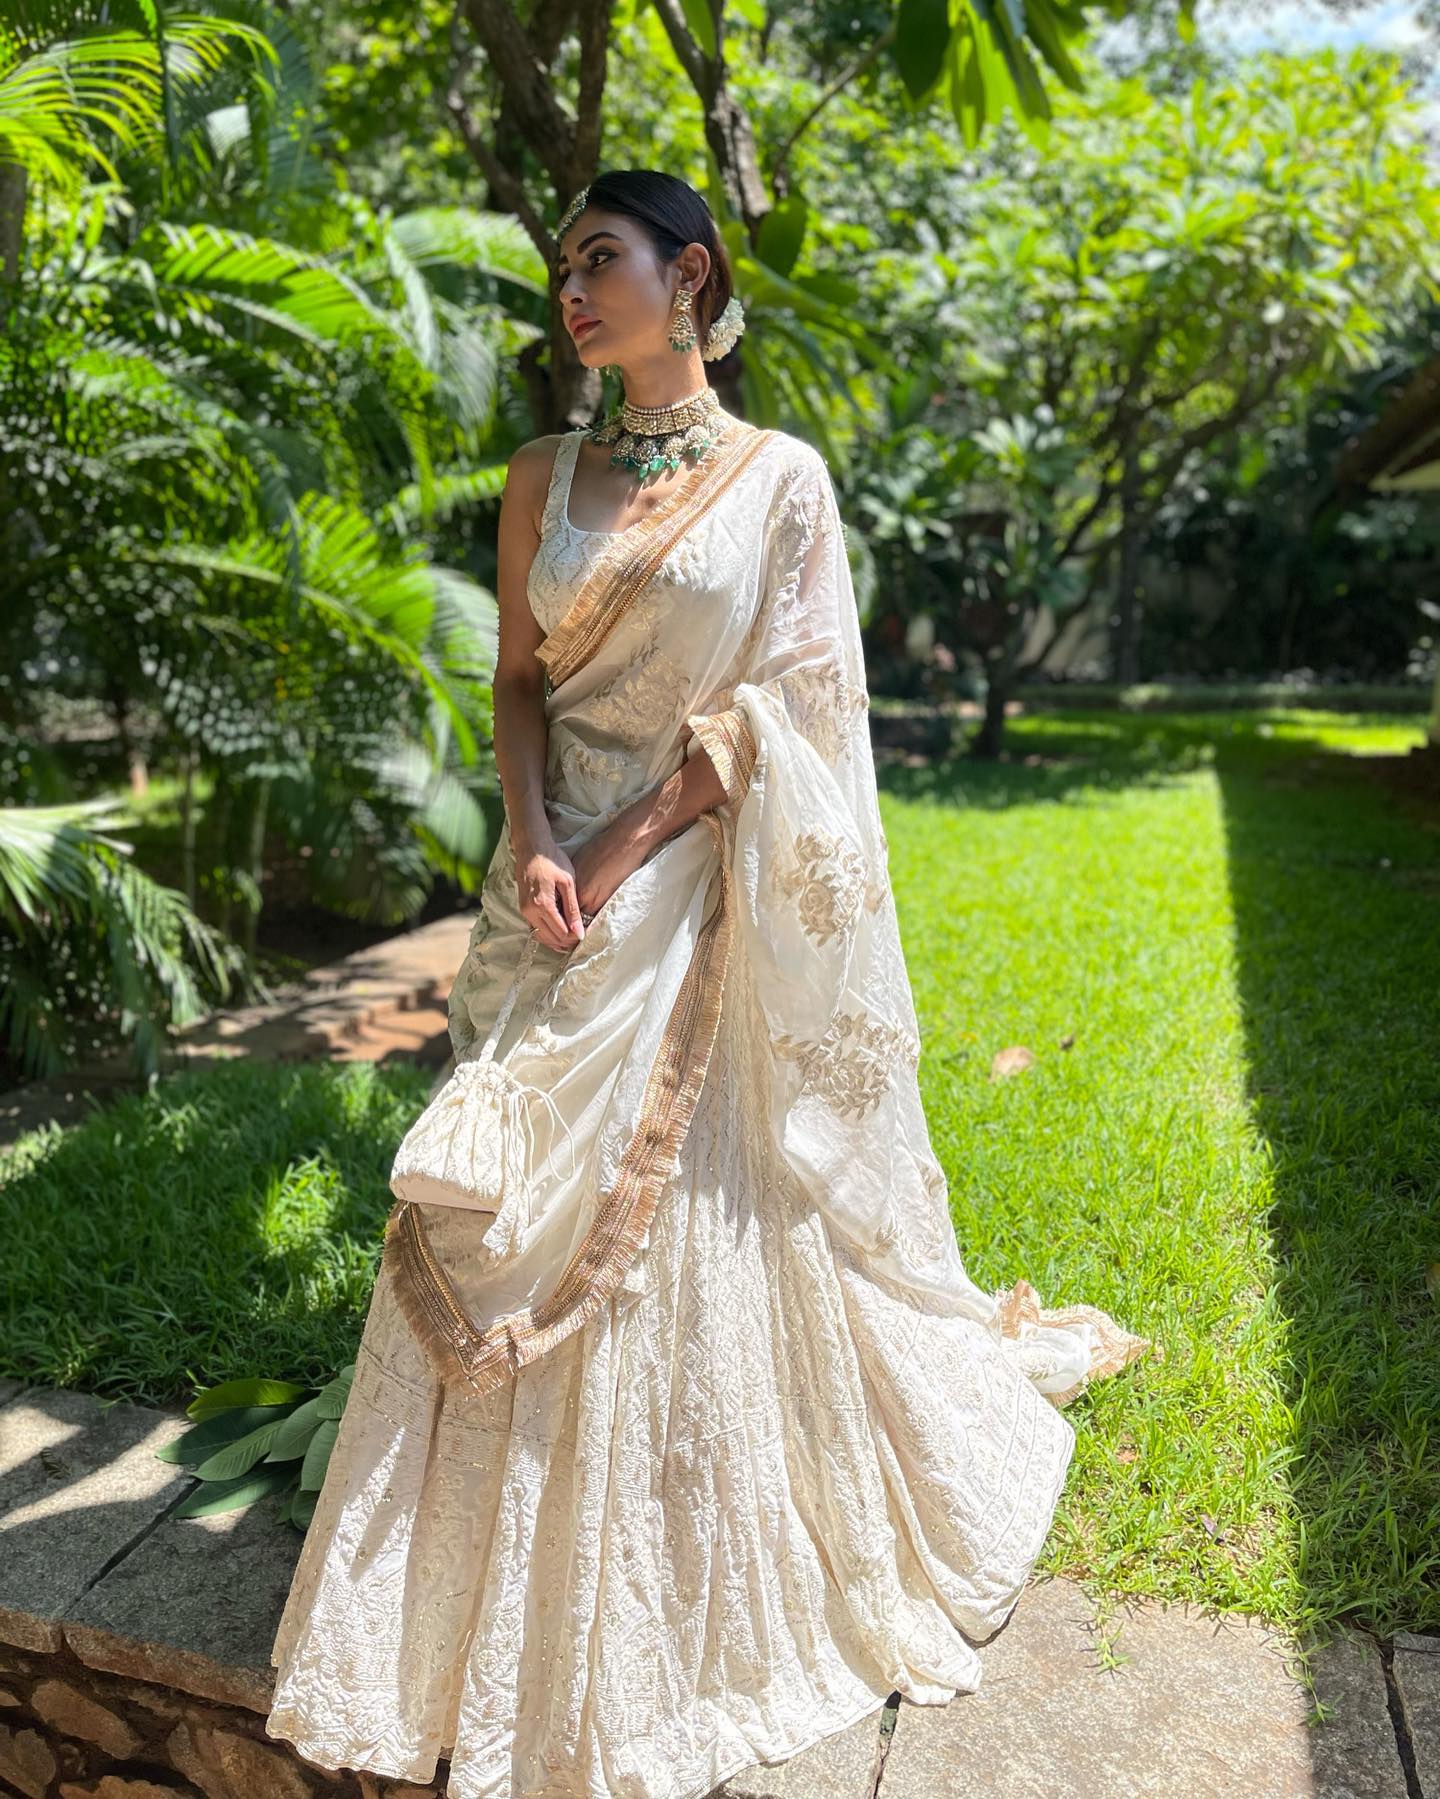 7 Bridesmaid Outfit Ideas To Steal From Mouni Roy's Closet